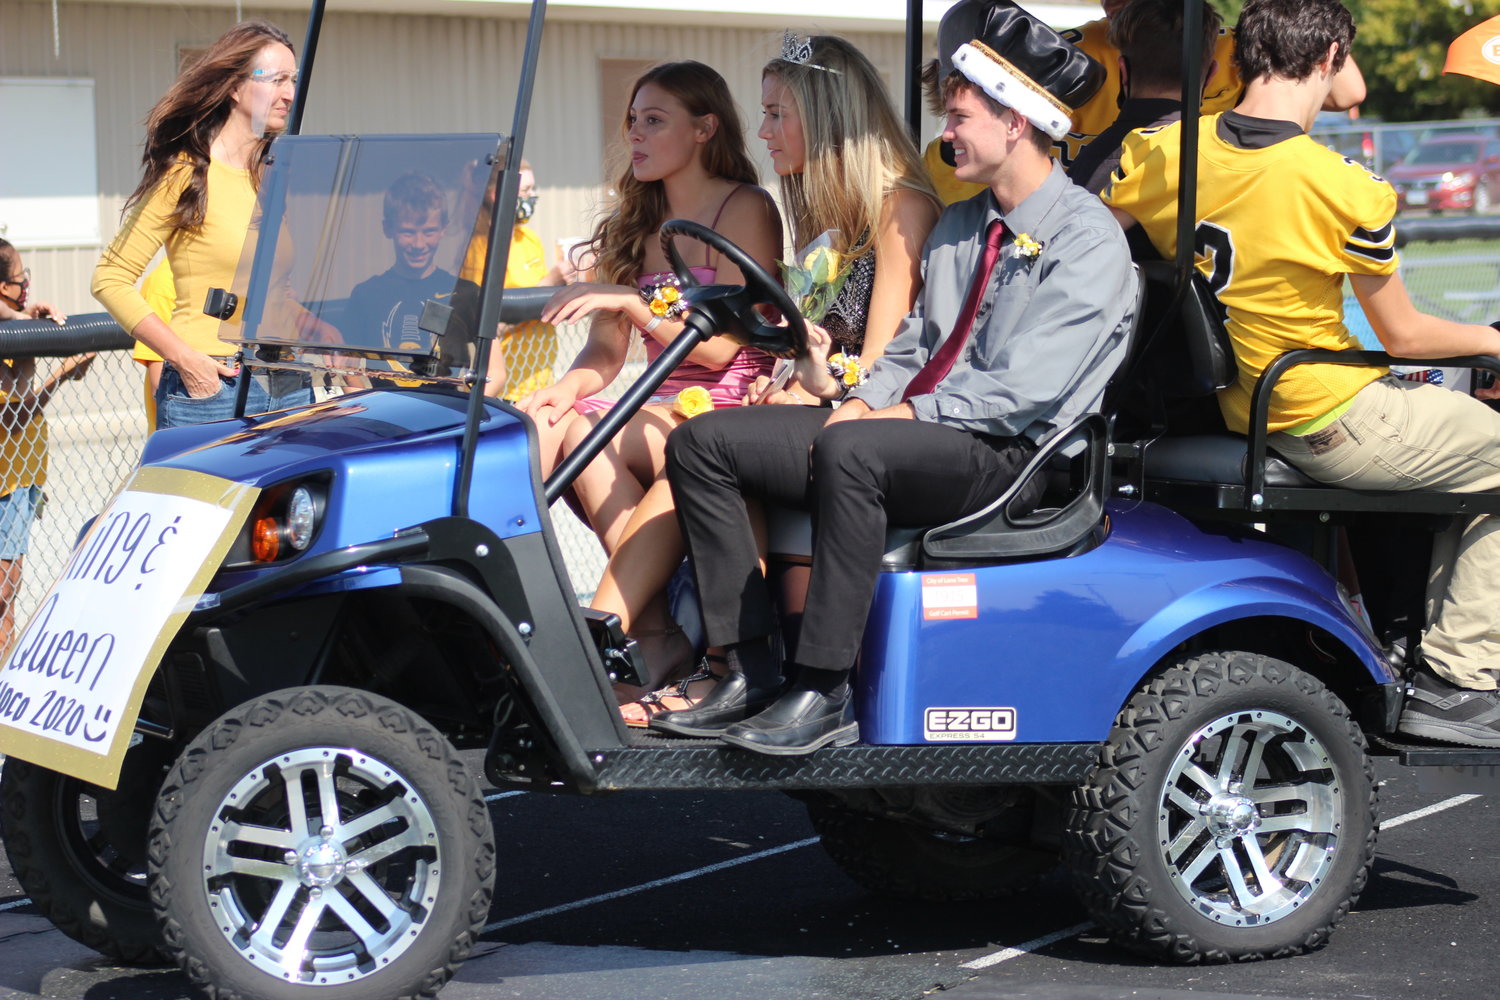 From left to right, Madeline Jacque, Josie Mullinnix, and Alex Viner ride off the football field after the homecoming assembly.